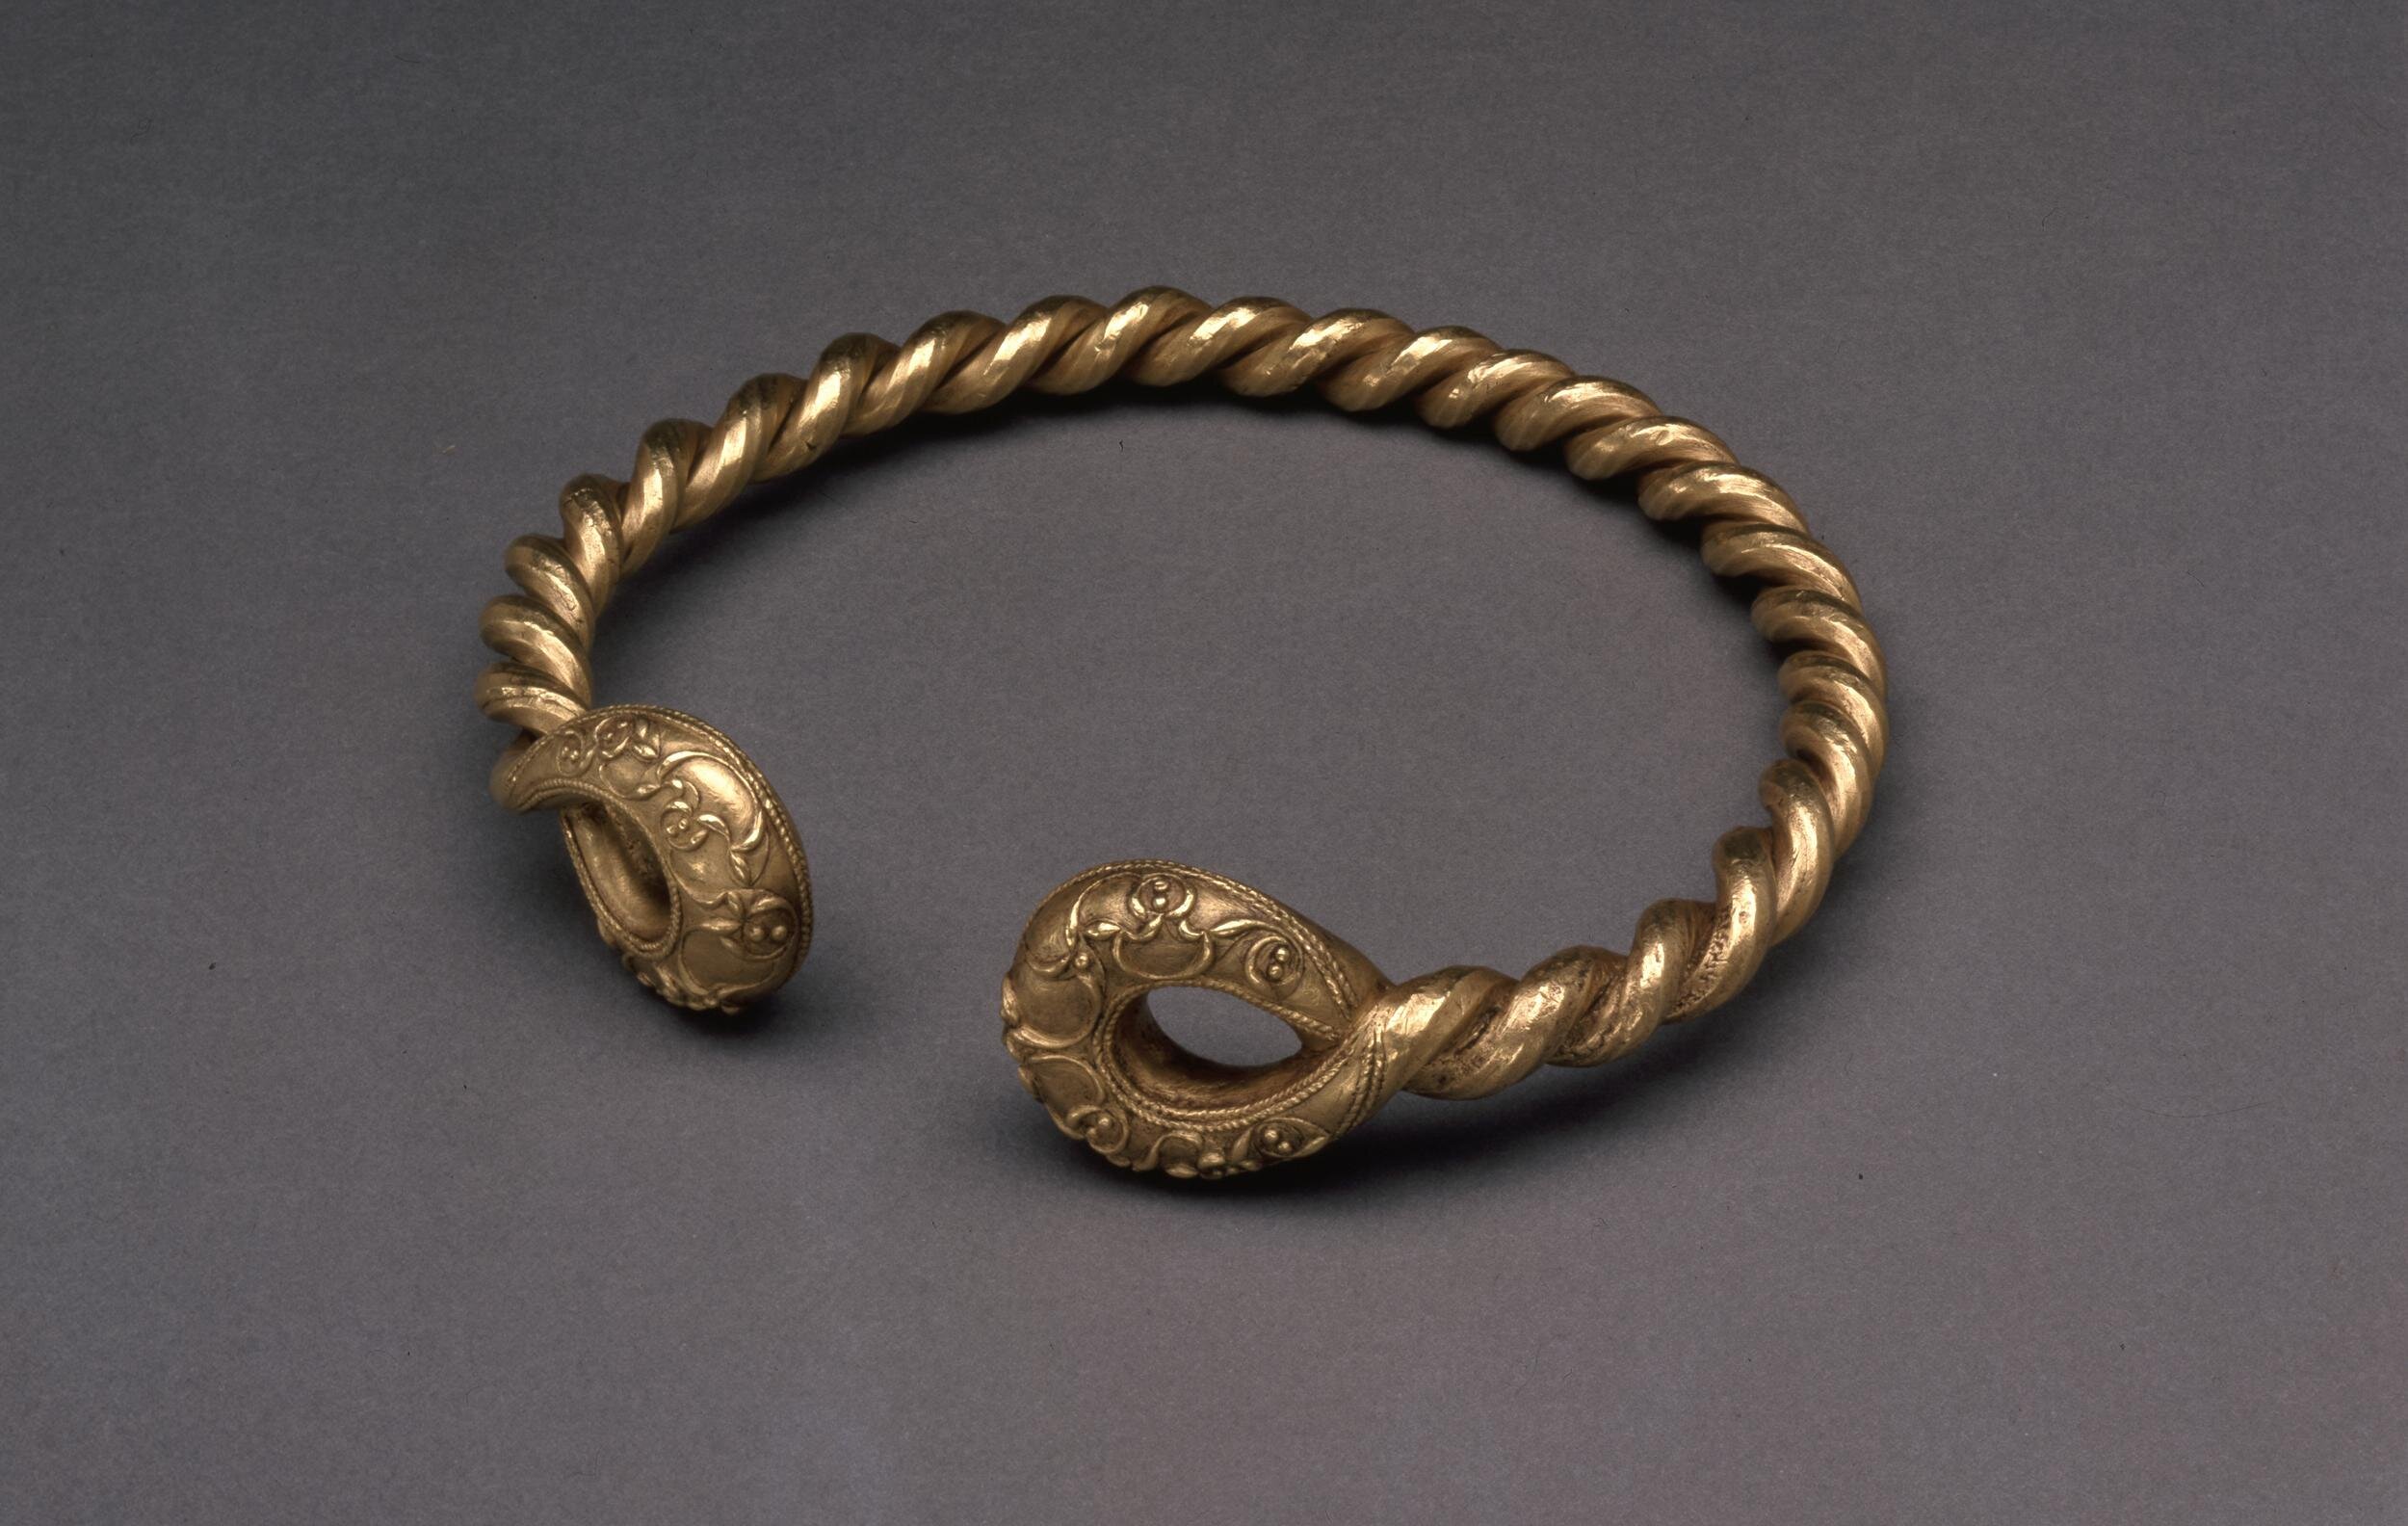 An Iron Age torc